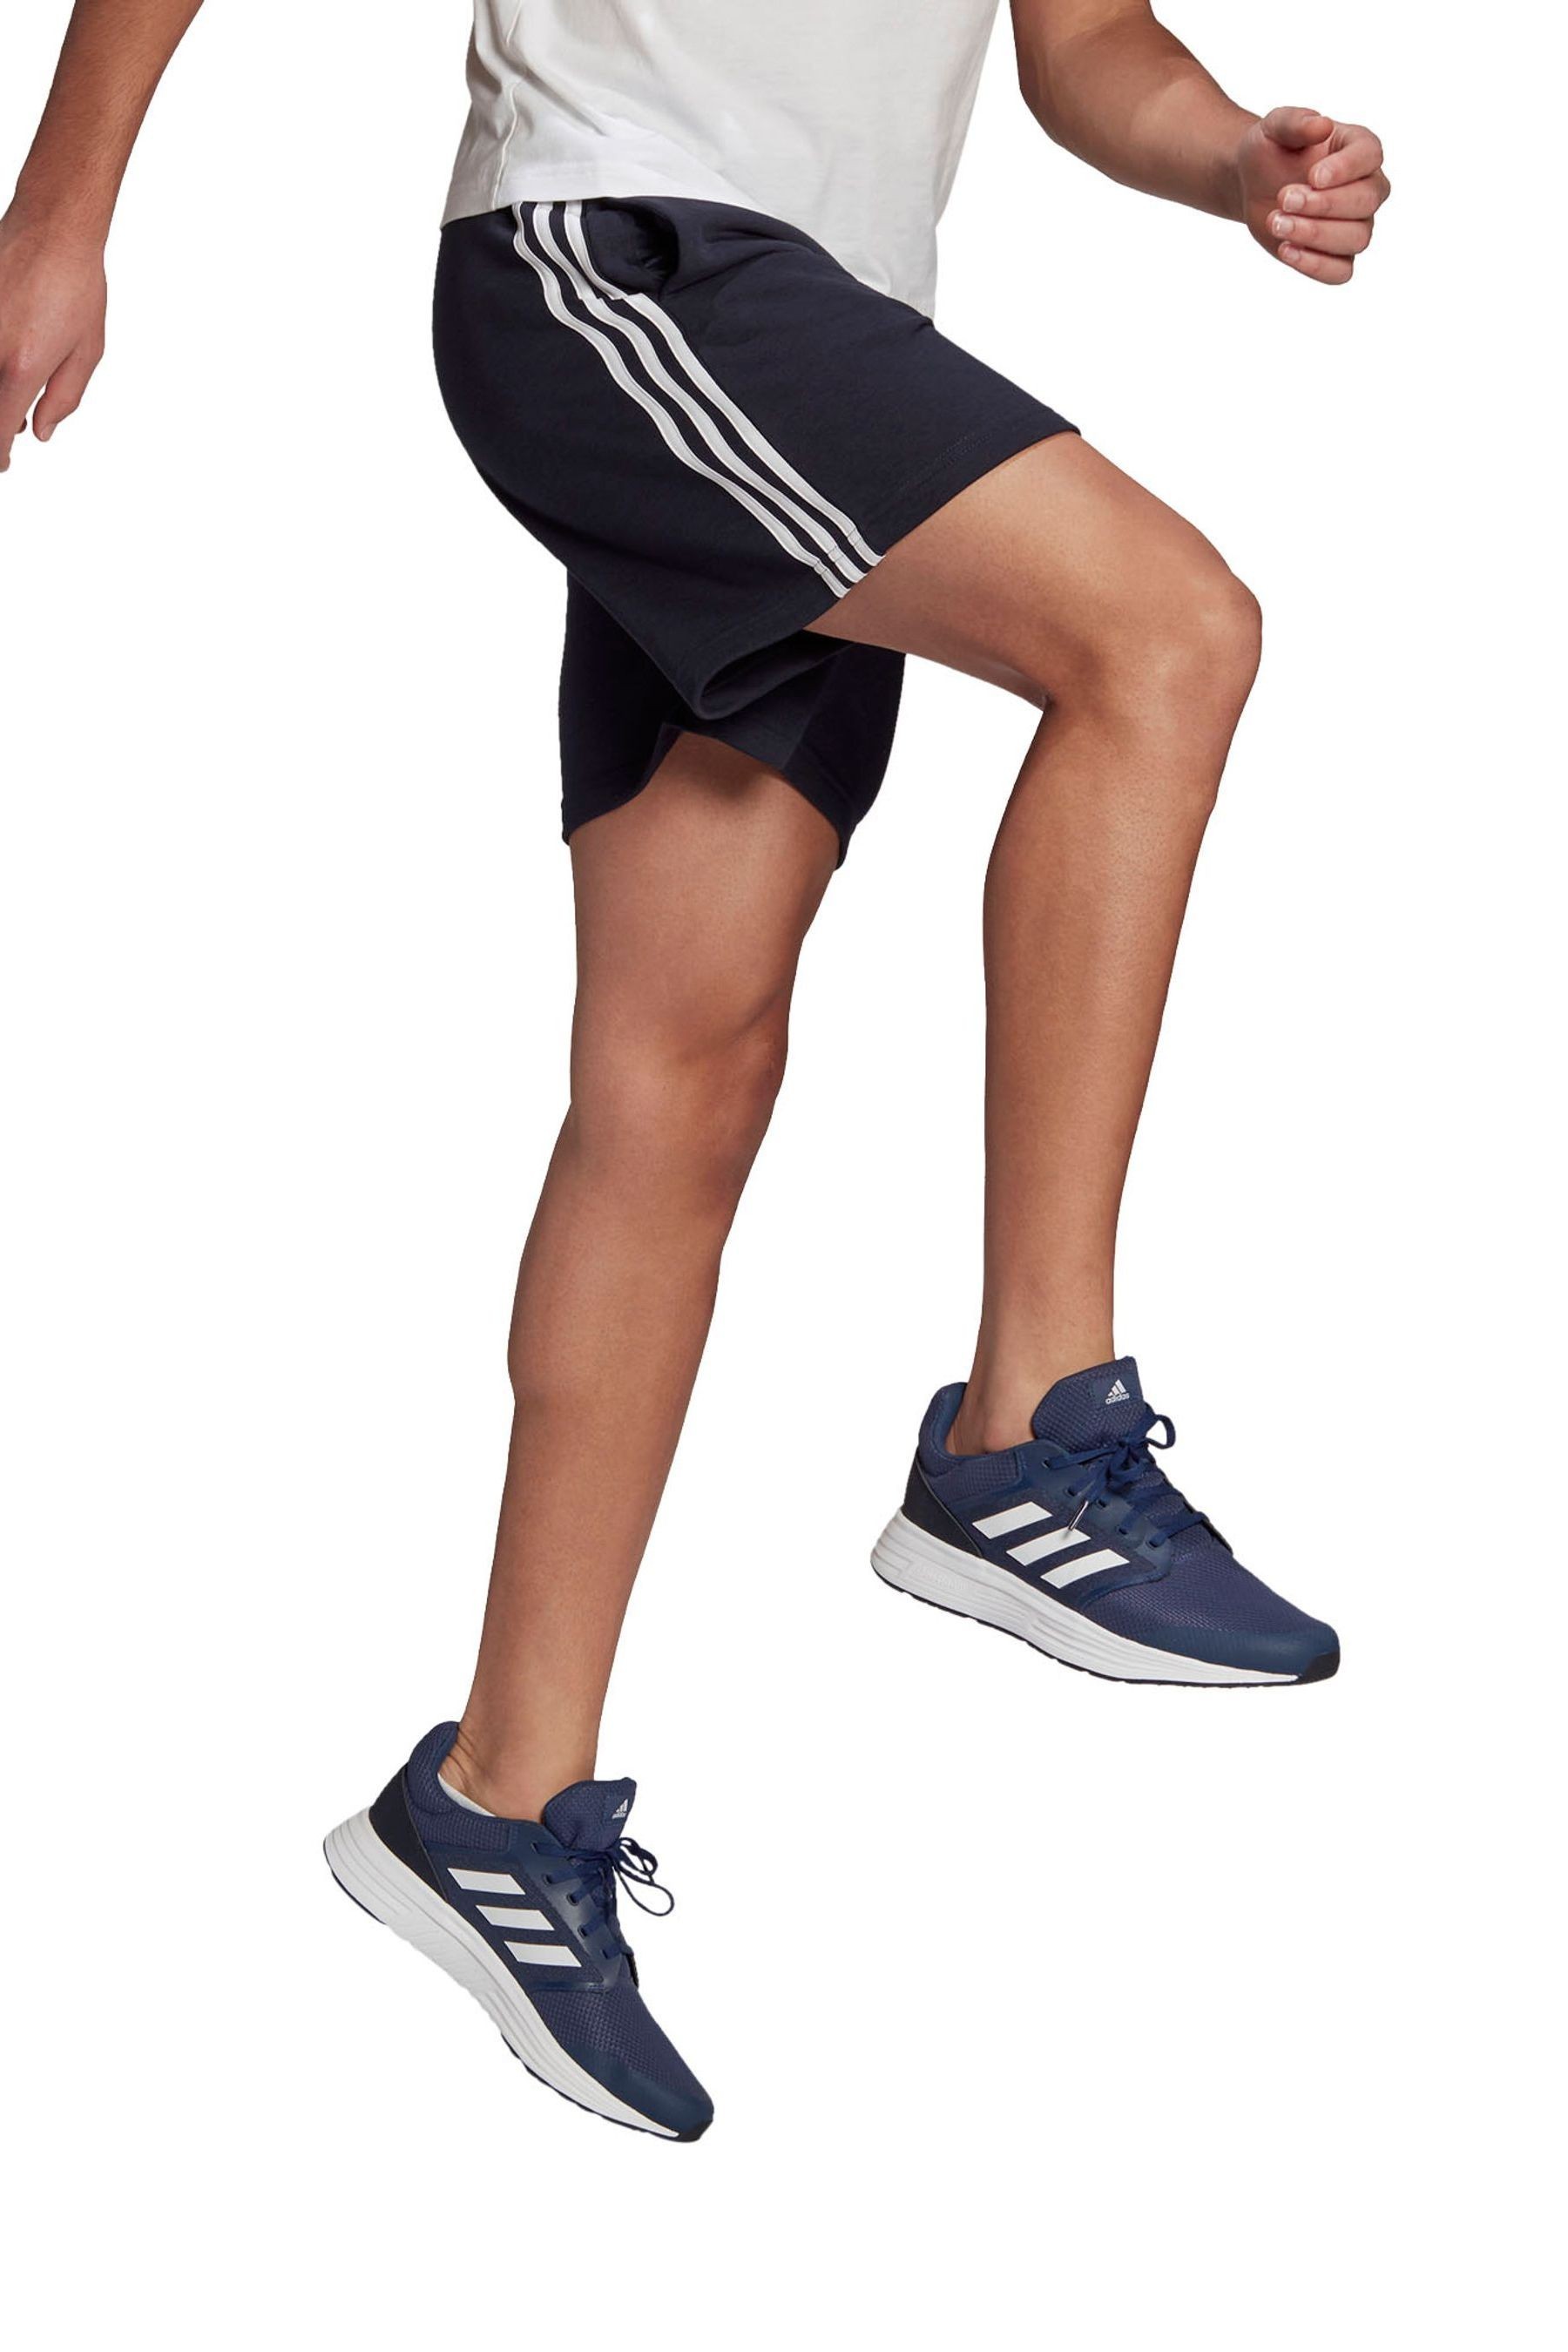 adidas French Terry 3 Stripe Shorts